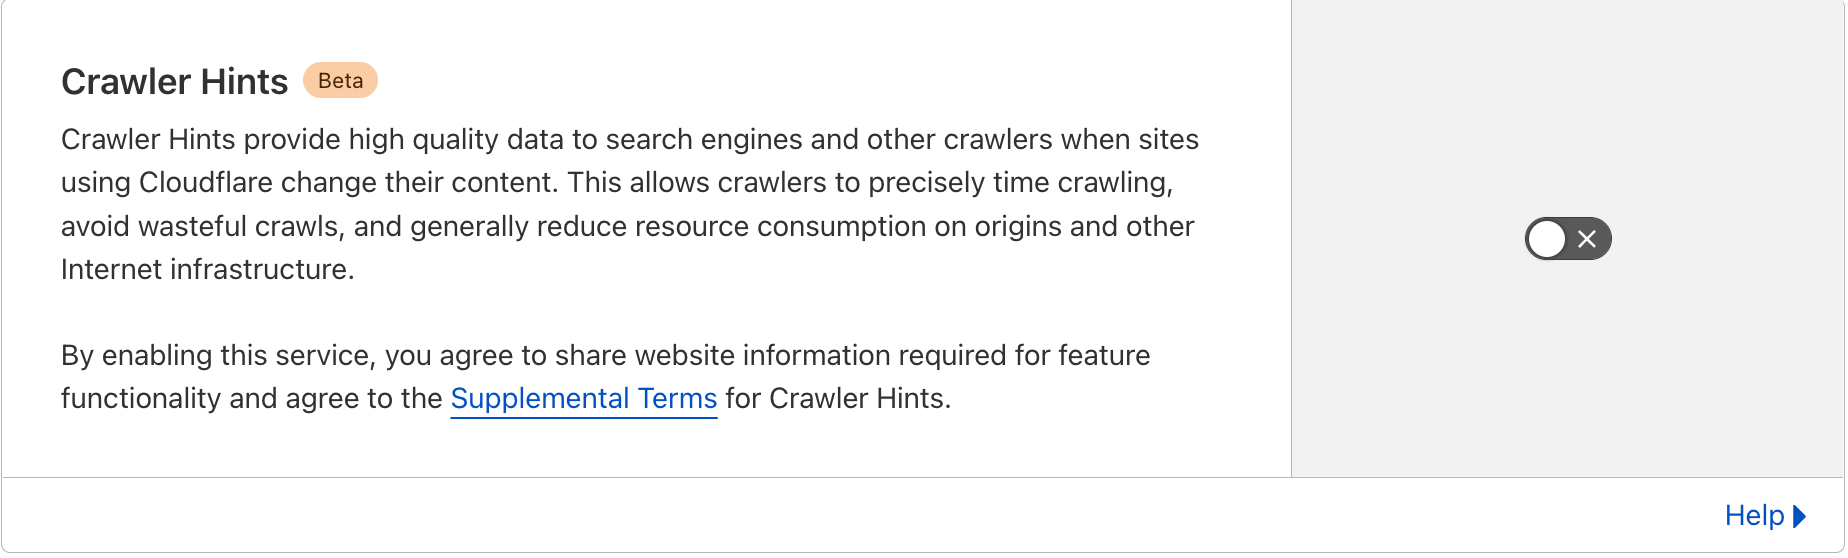 Crawler Hints supports Microsoft’s IndexNow in helping users find new content